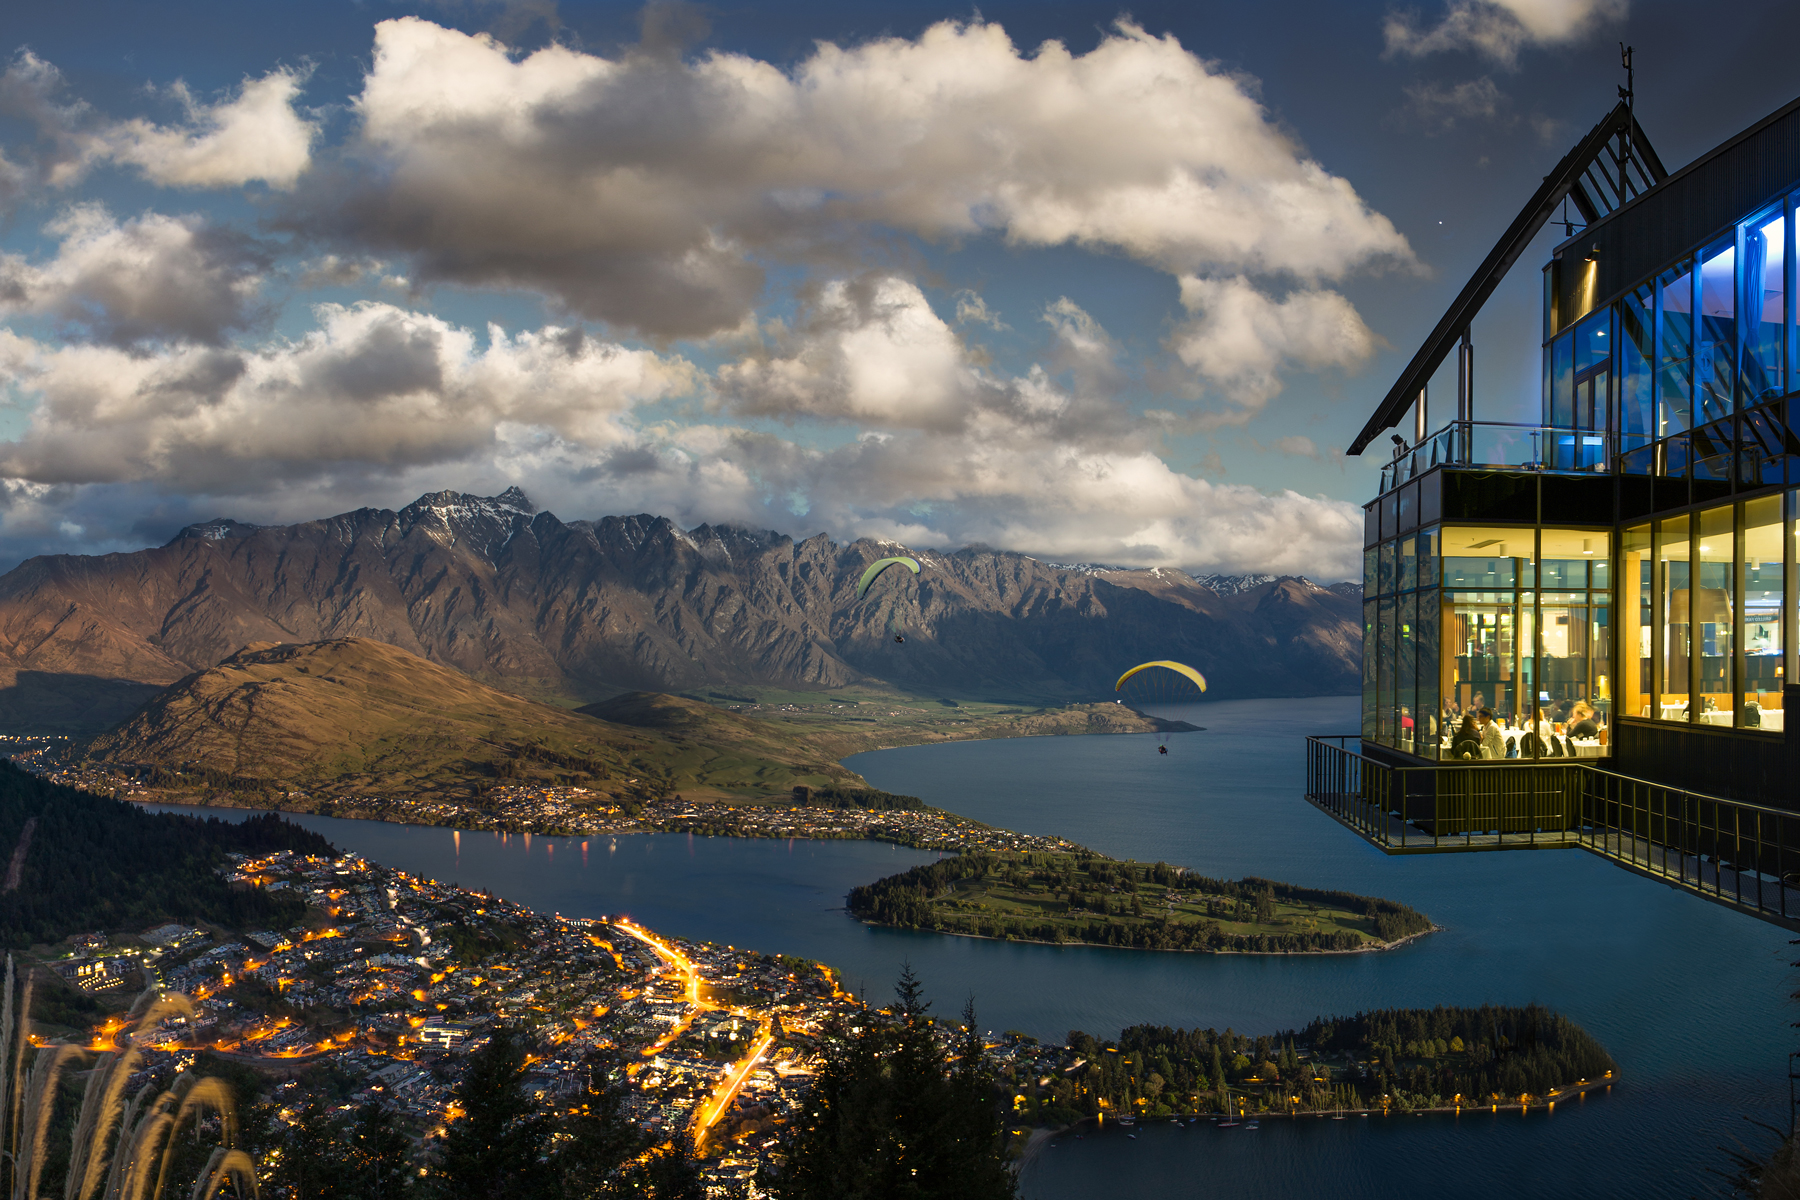 The Top 10 Things to Do in Queenstown, New Zealand